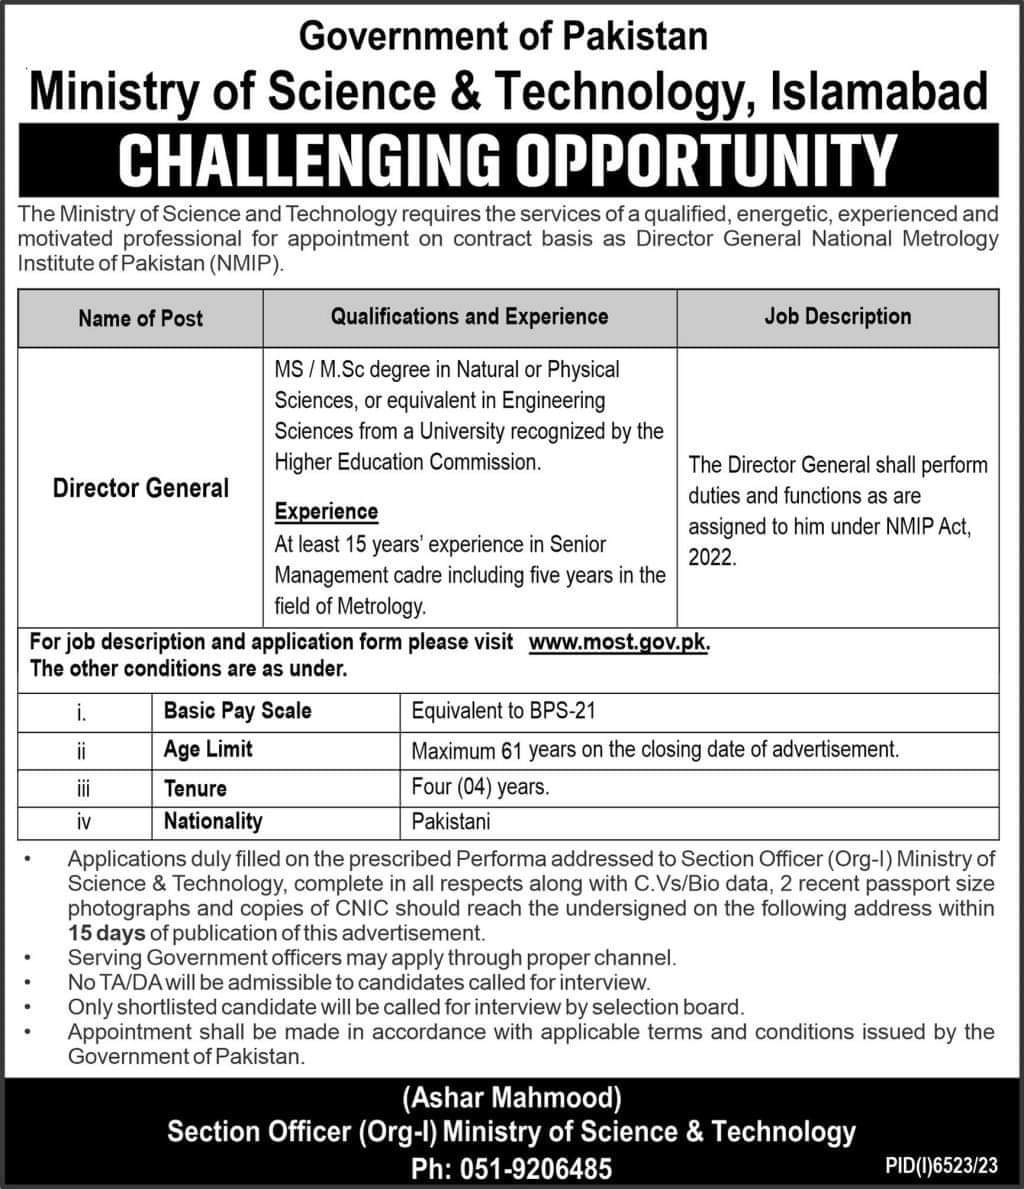 Ministry of Science and Technology Latest jobs 2024